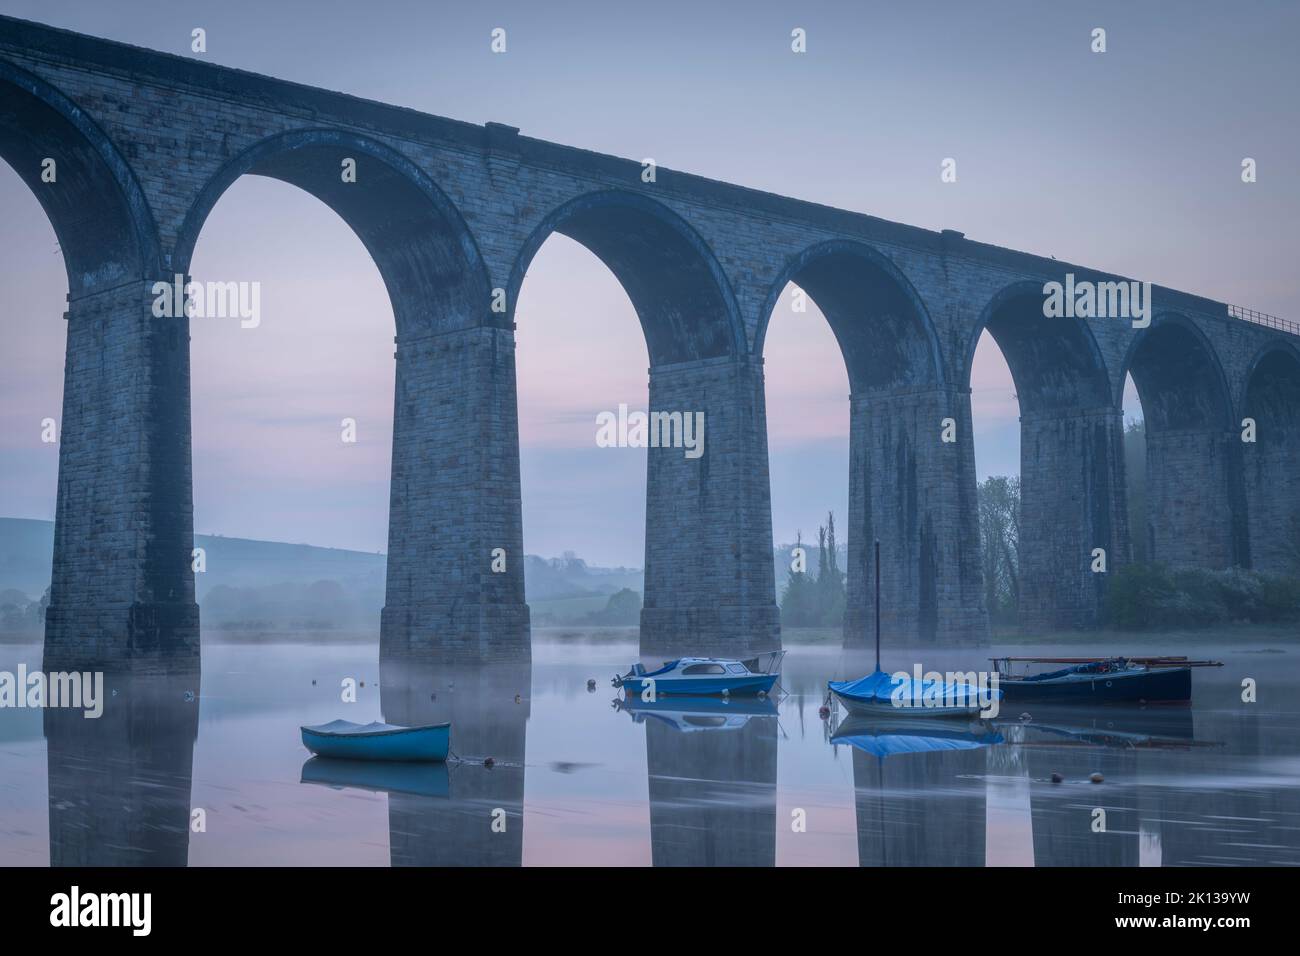 Boats beneath St. Germans Victorian viaduct at dawn, St. Germans in Cornwall, England, United Kingdom, Europe Stock Photo